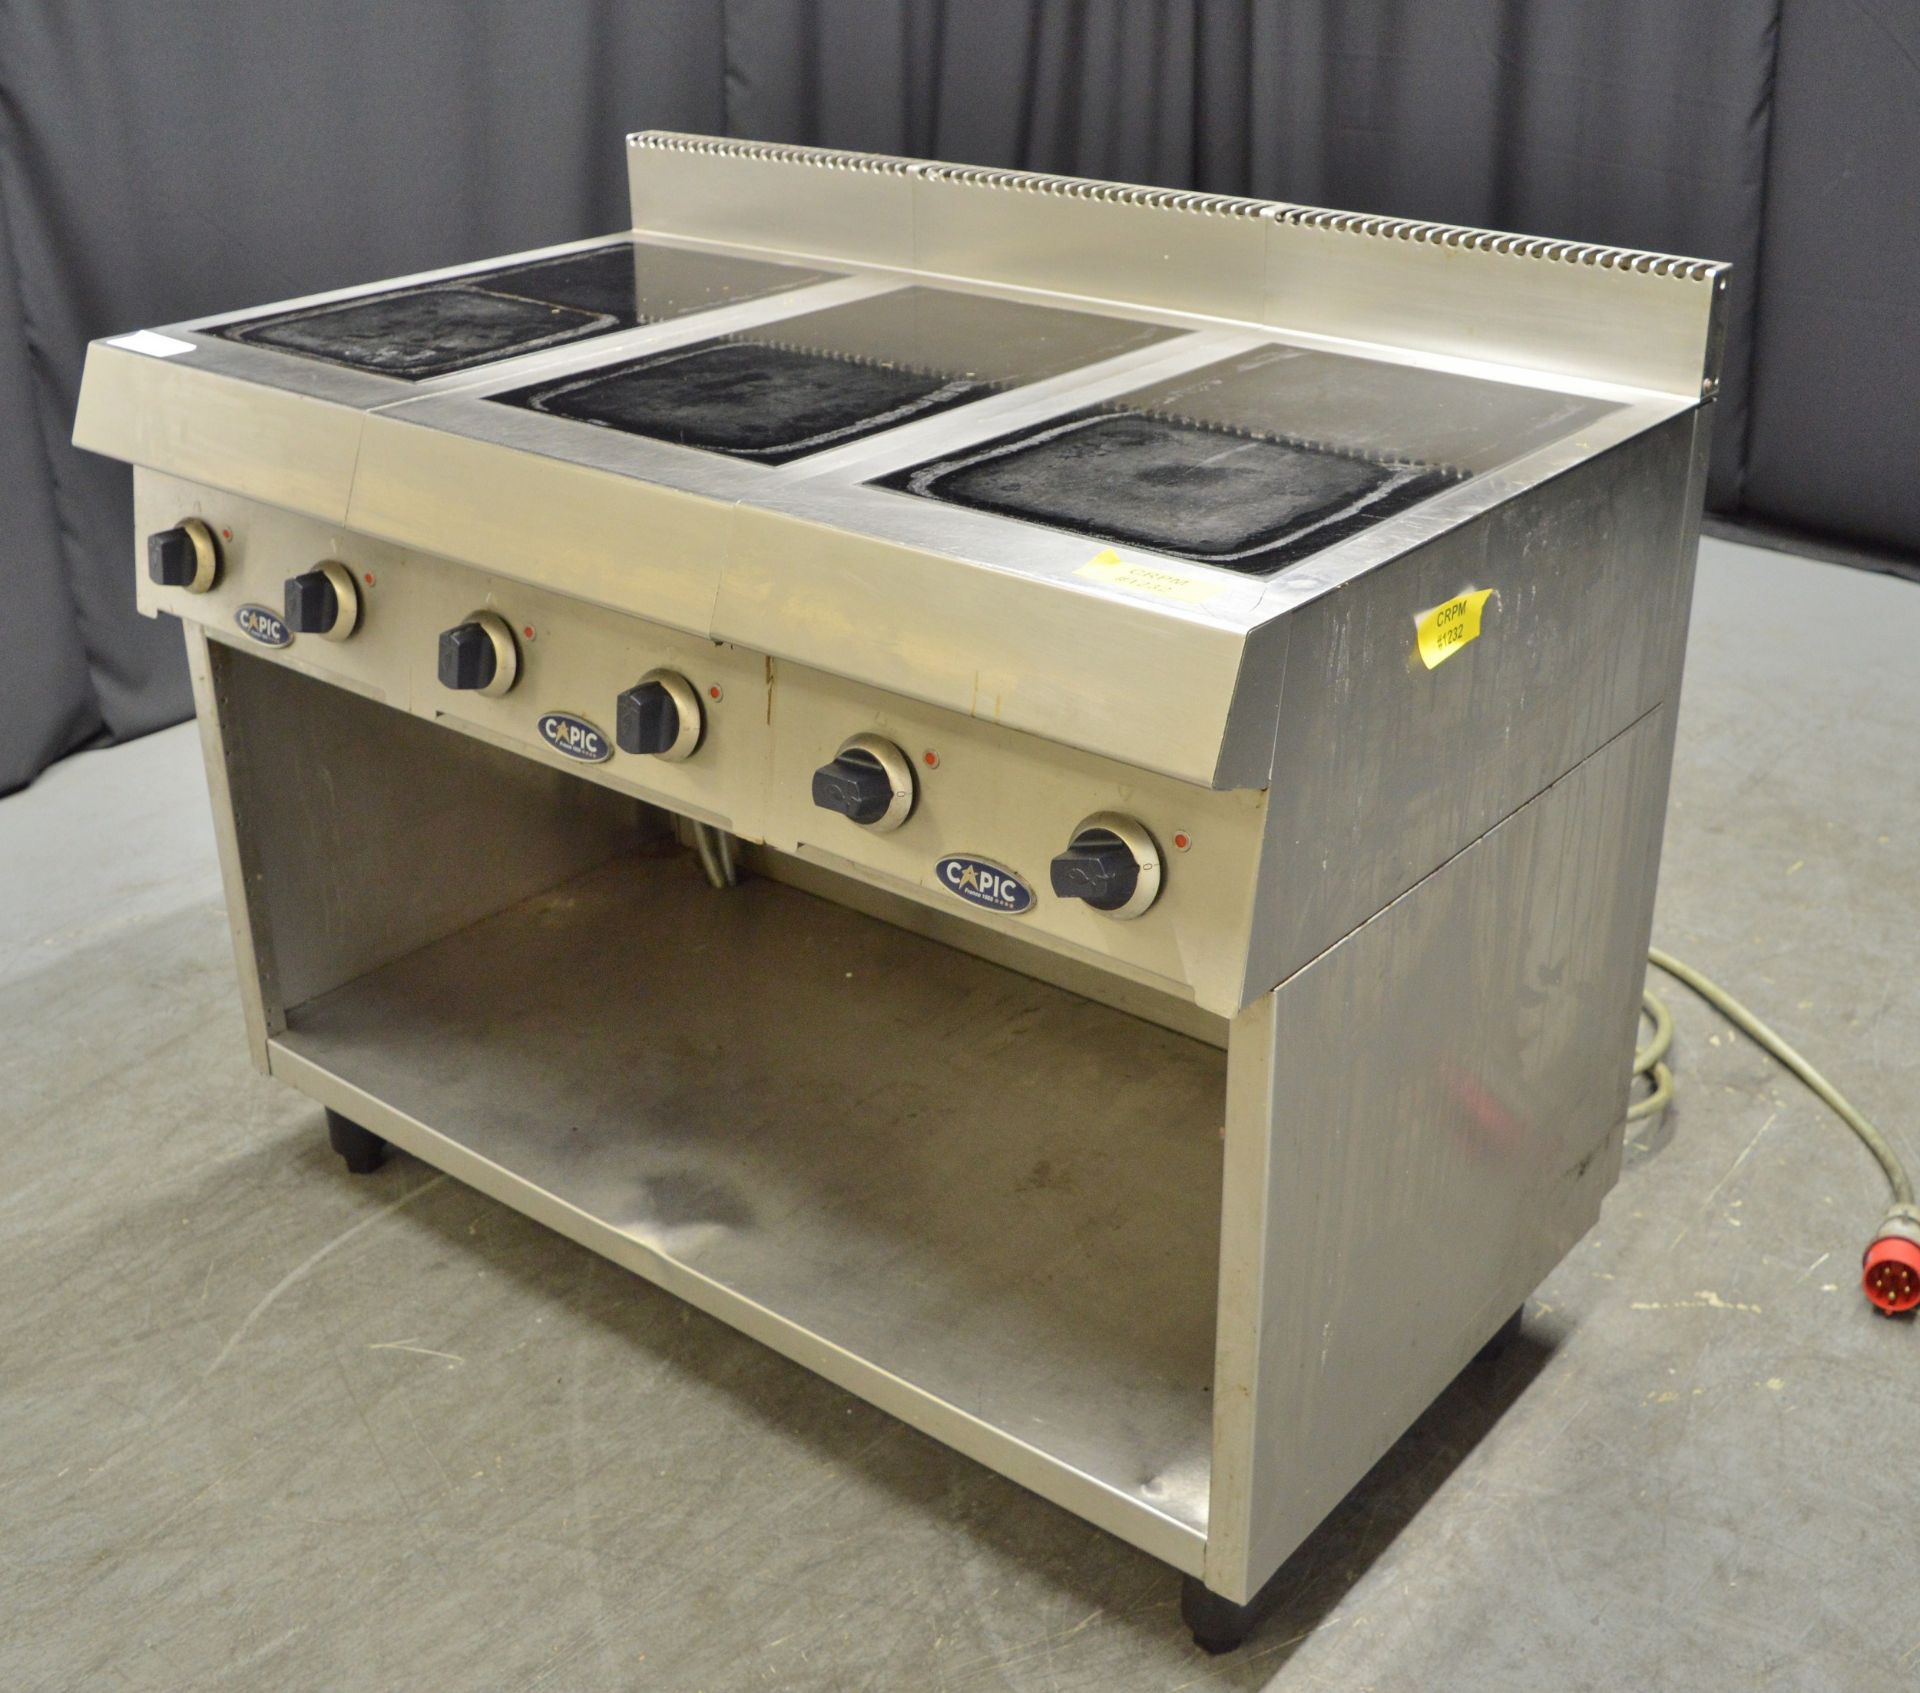 Triple Capic Hot Plates - 415v 3-Phase on Stainless Steel Unit - L1200 x W650 x H620mm - Image 3 of 6